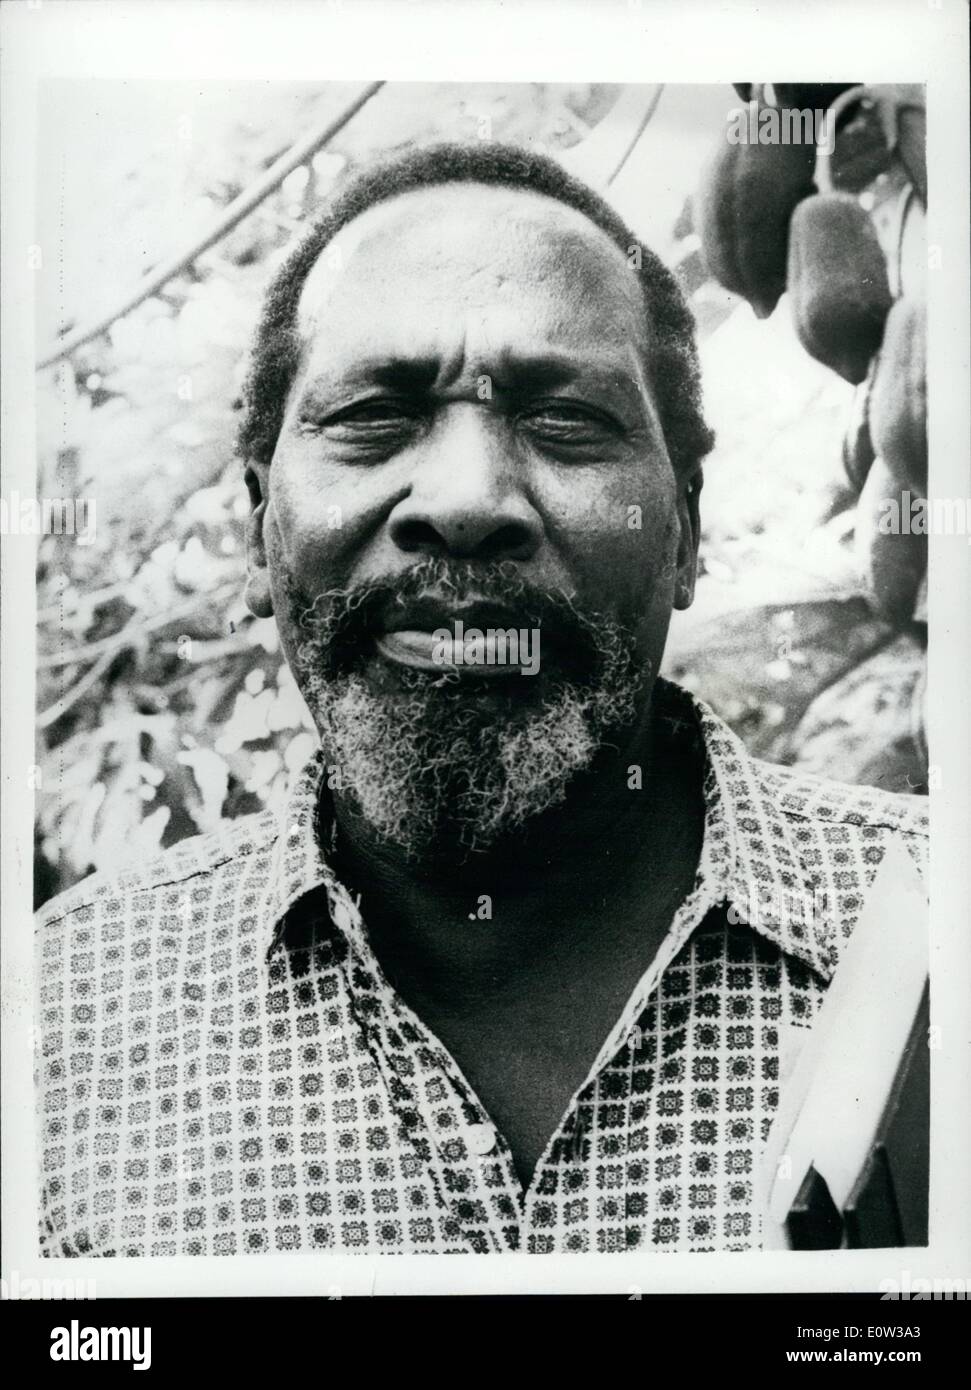 Mar. 03, 1961 - The voice of Jomo Kenyatta - applauded at All-Africa people's conference in Cairo.: The voice of JOMO KENYATTA the convicted leader of the Mau Mau terrorists in Kenya- was heard by delegates at the All-African People's Conference in Cairo.. The voice had been tape-recorded and taken to the conference by MR. TOM MBOYA, Secretary of the Kenya African National Union.. Kenyatta is living under restriction in a remote Kenya Village - and this was the first time his voice had been heard after eight years of imprisonment Stock Photo